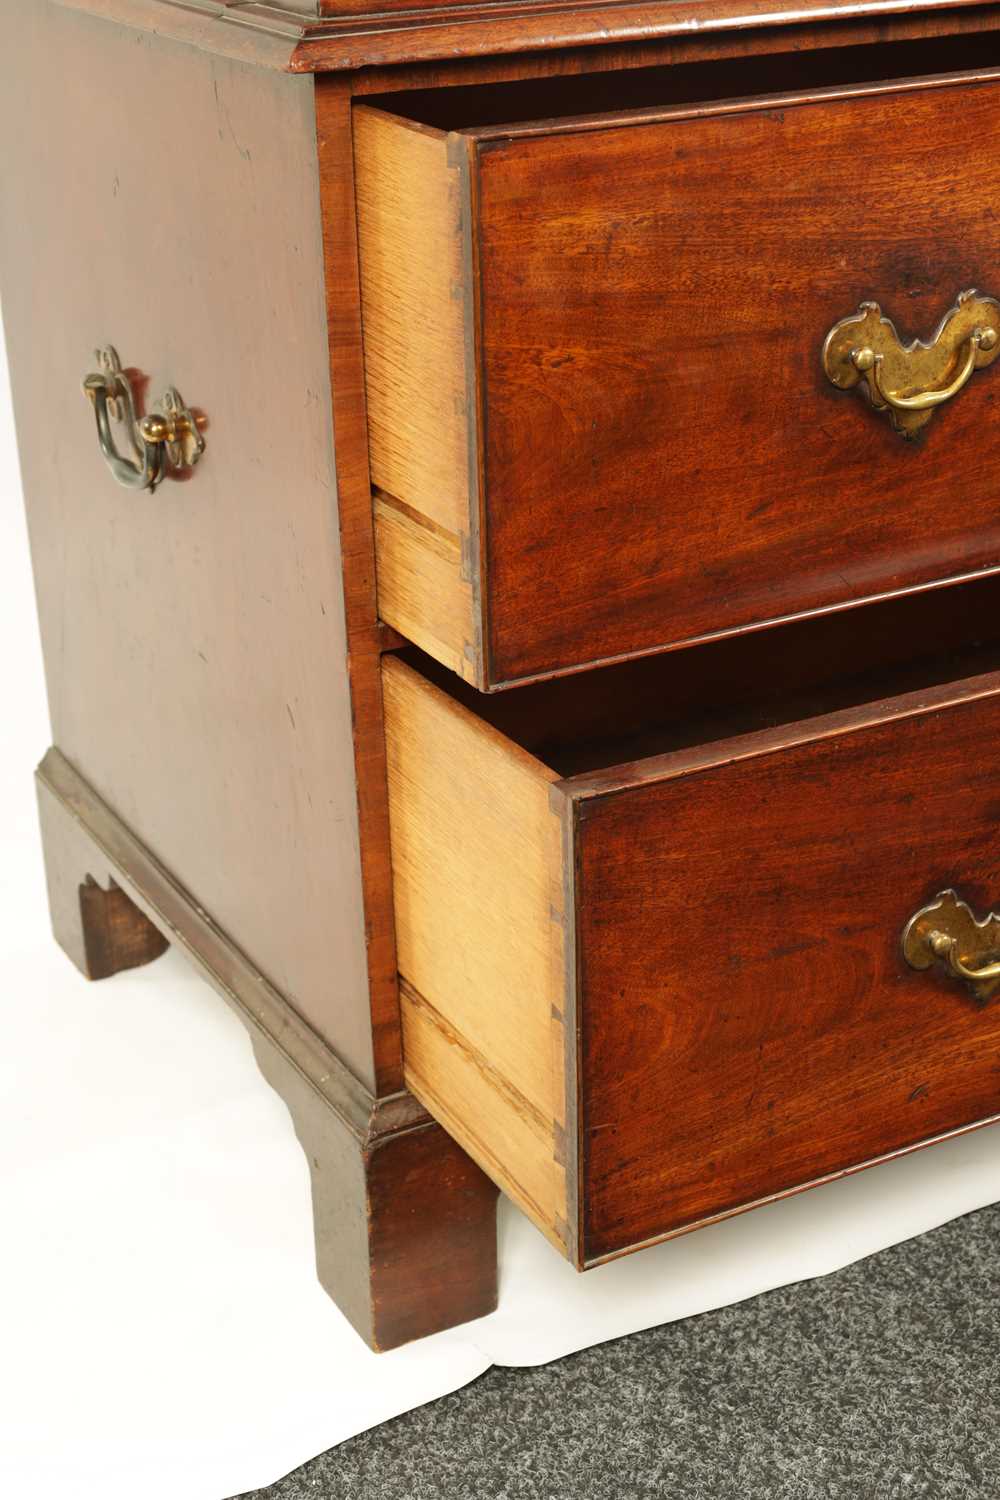 A FINE GEORGE II FIGURED MAHOGANY ARCHITECTURAL SECRETAIRE CABINET IN THE MANNER OF JOHN CHANNON - Image 3 of 14